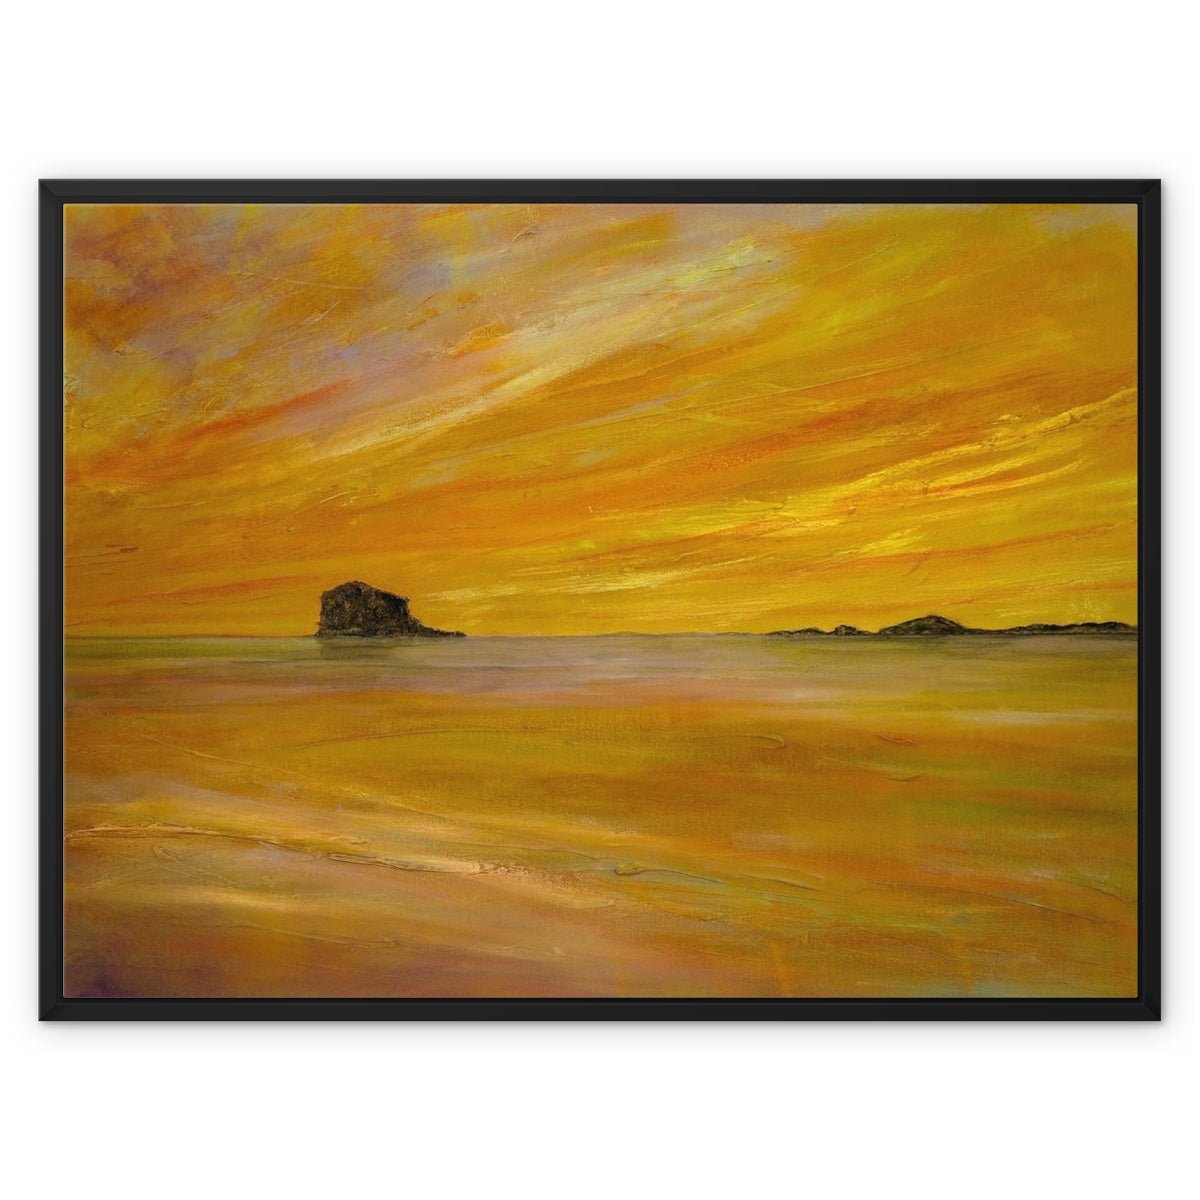 Bass Rock Dusk Painting | Framed Canvas From Scotland-Floating Framed Canvas Prints-Edinburgh & Glasgow Art Gallery-32"x24"-Black Frame-Paintings, Prints, Homeware, Art Gifts From Scotland By Scottish Artist Kevin Hunter